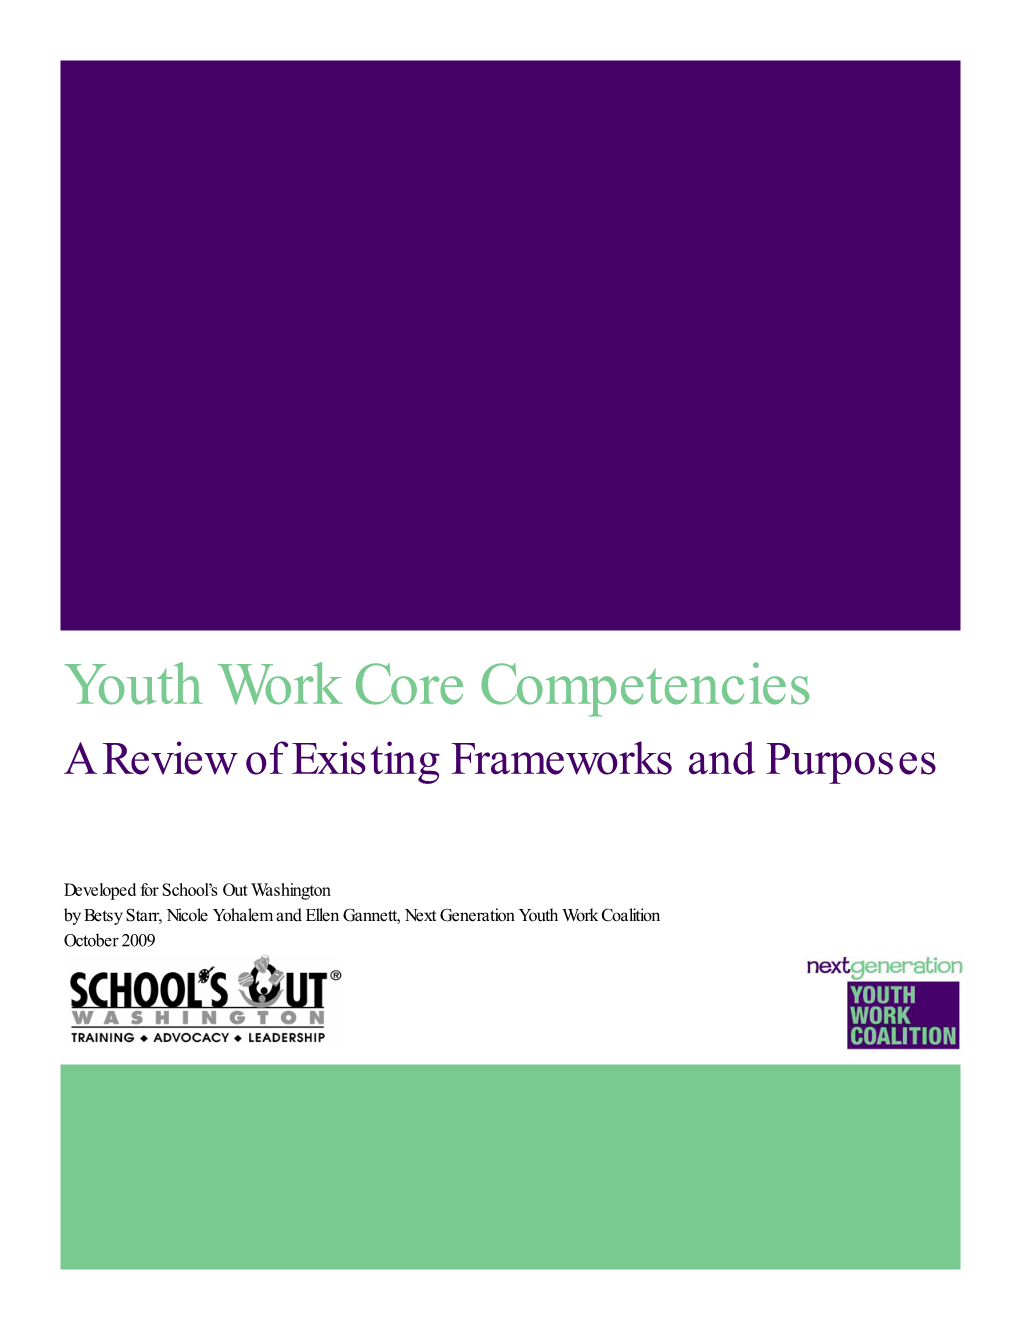 Youth Work Core Competencies